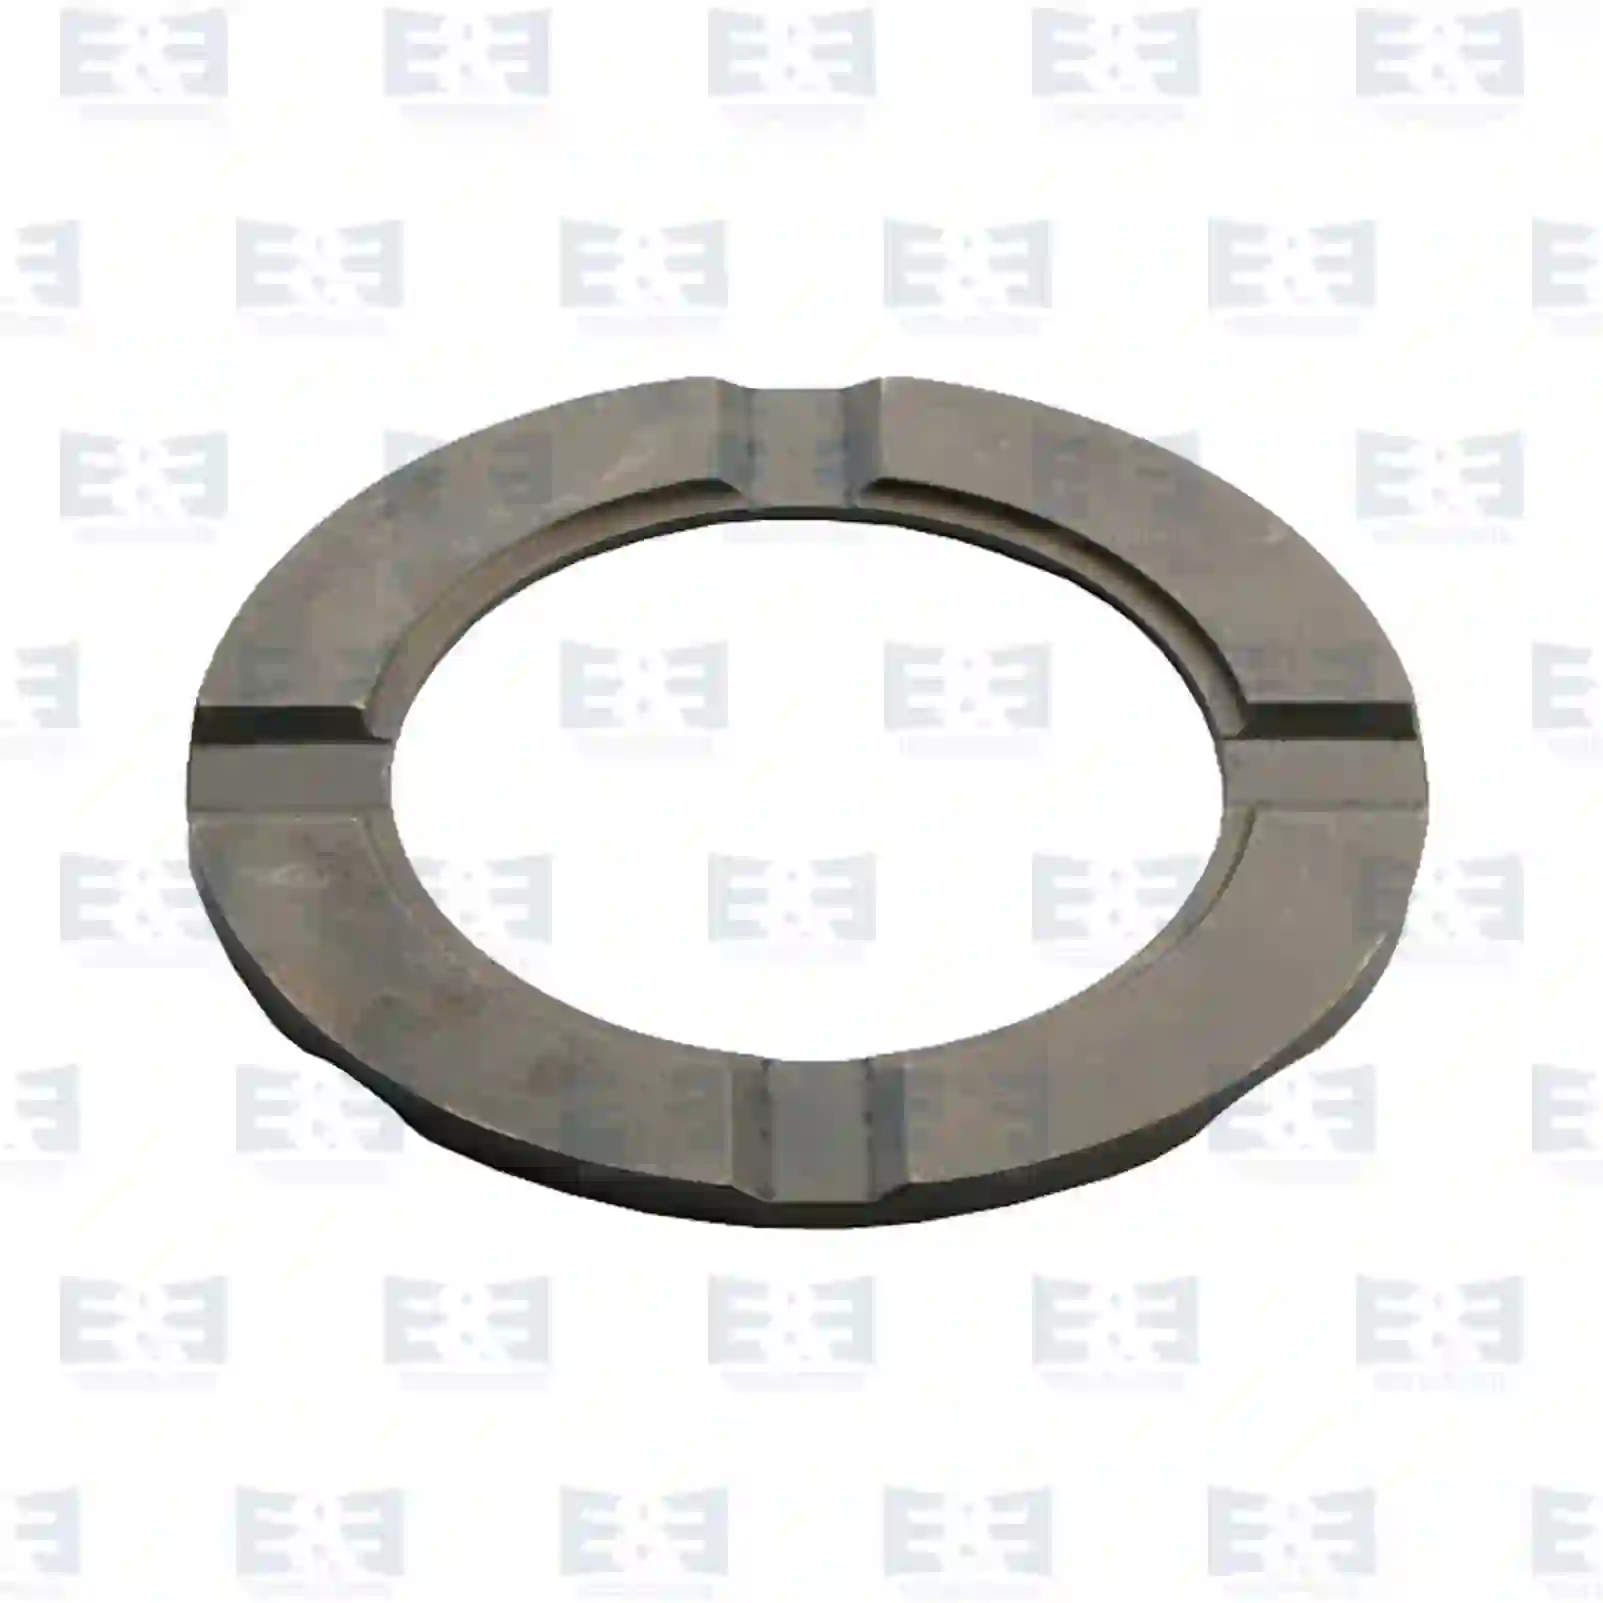  Thrust washer || E&E Truck Spare Parts | Truck Spare Parts, Auotomotive Spare Parts